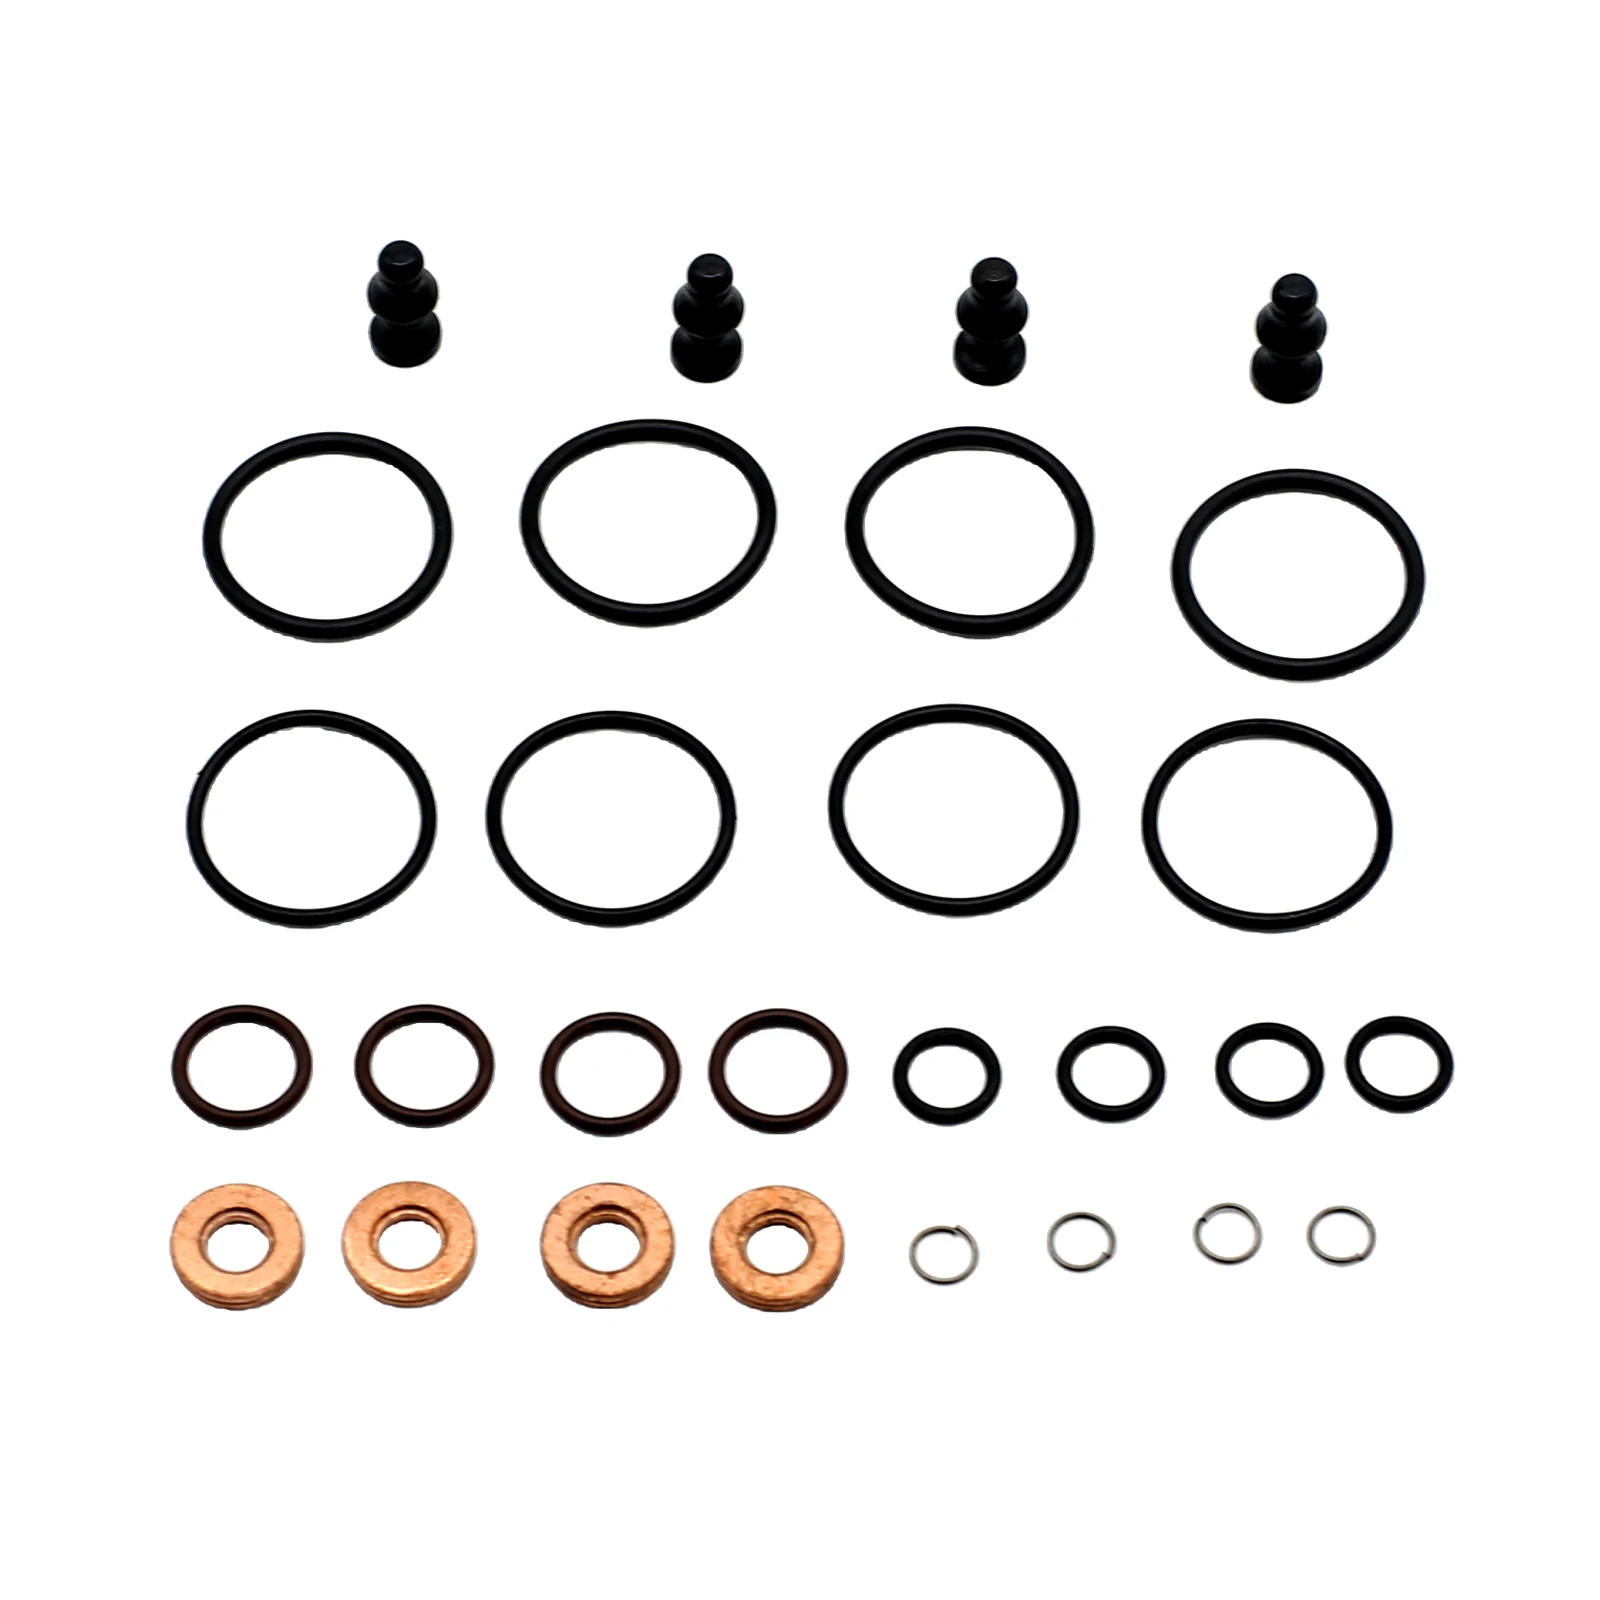 Automobile Engine Fuel System Pump Seal Sealing O Rings Repair Kit Full Set Replacement for Bosch SI-AT28081